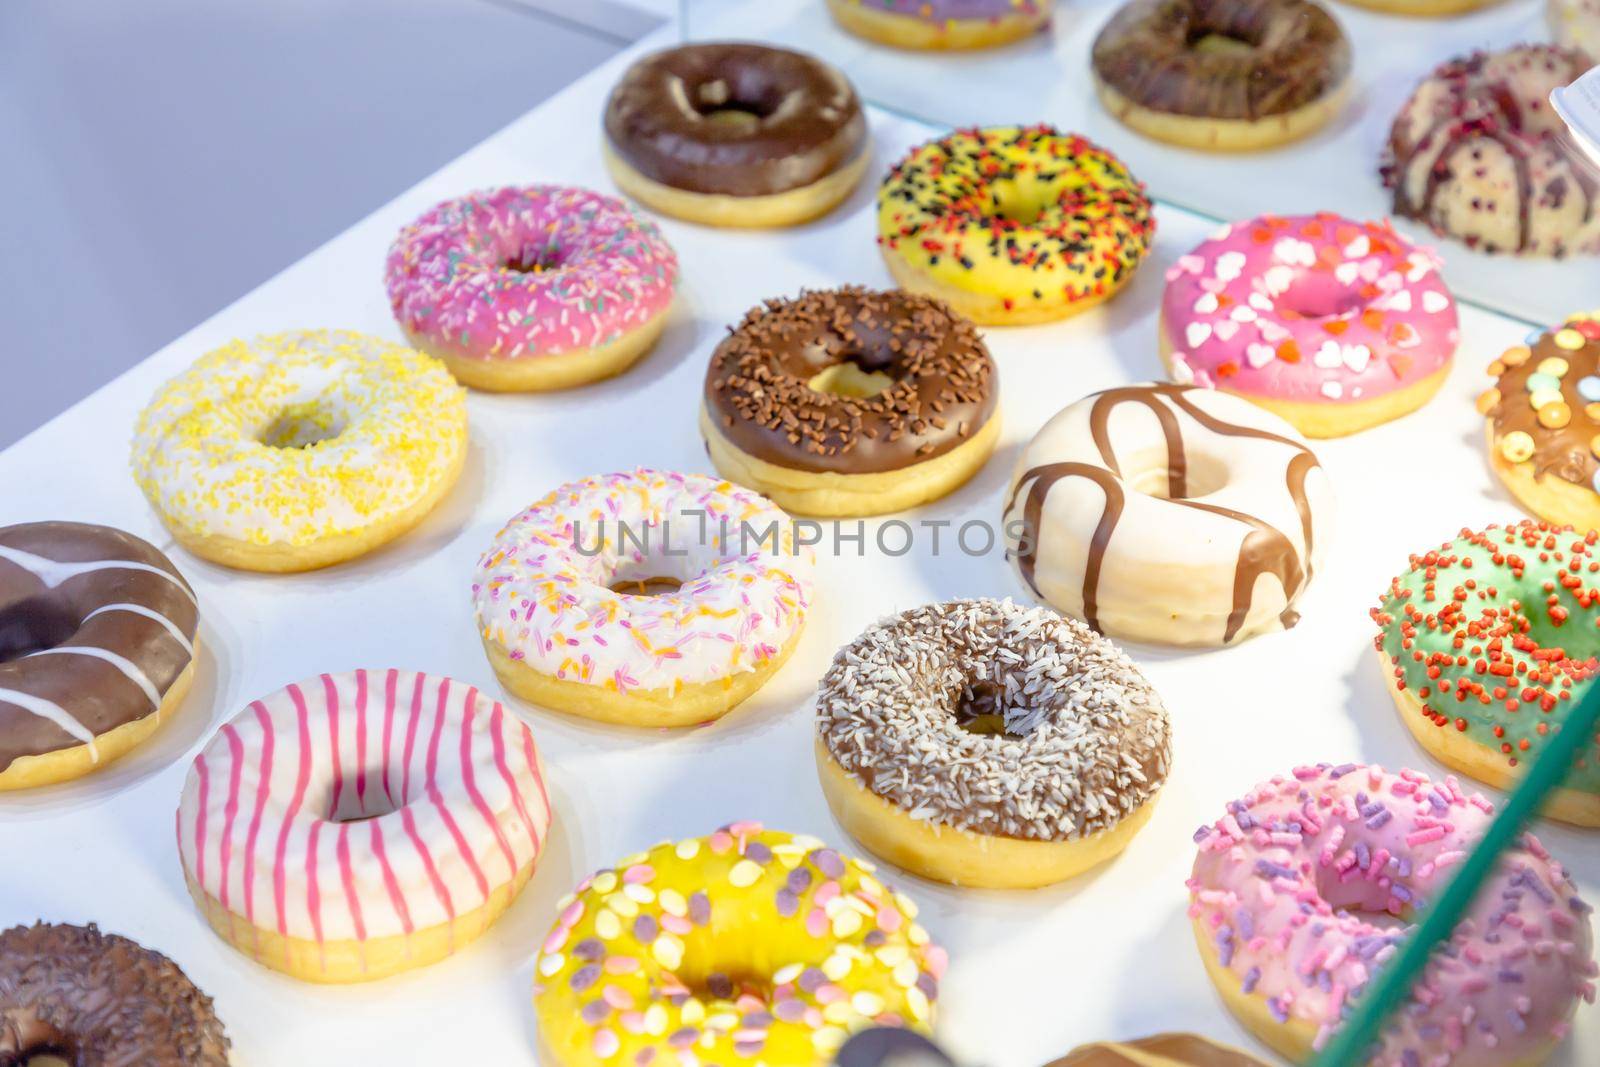 Different donuts are on display in a pastry shop